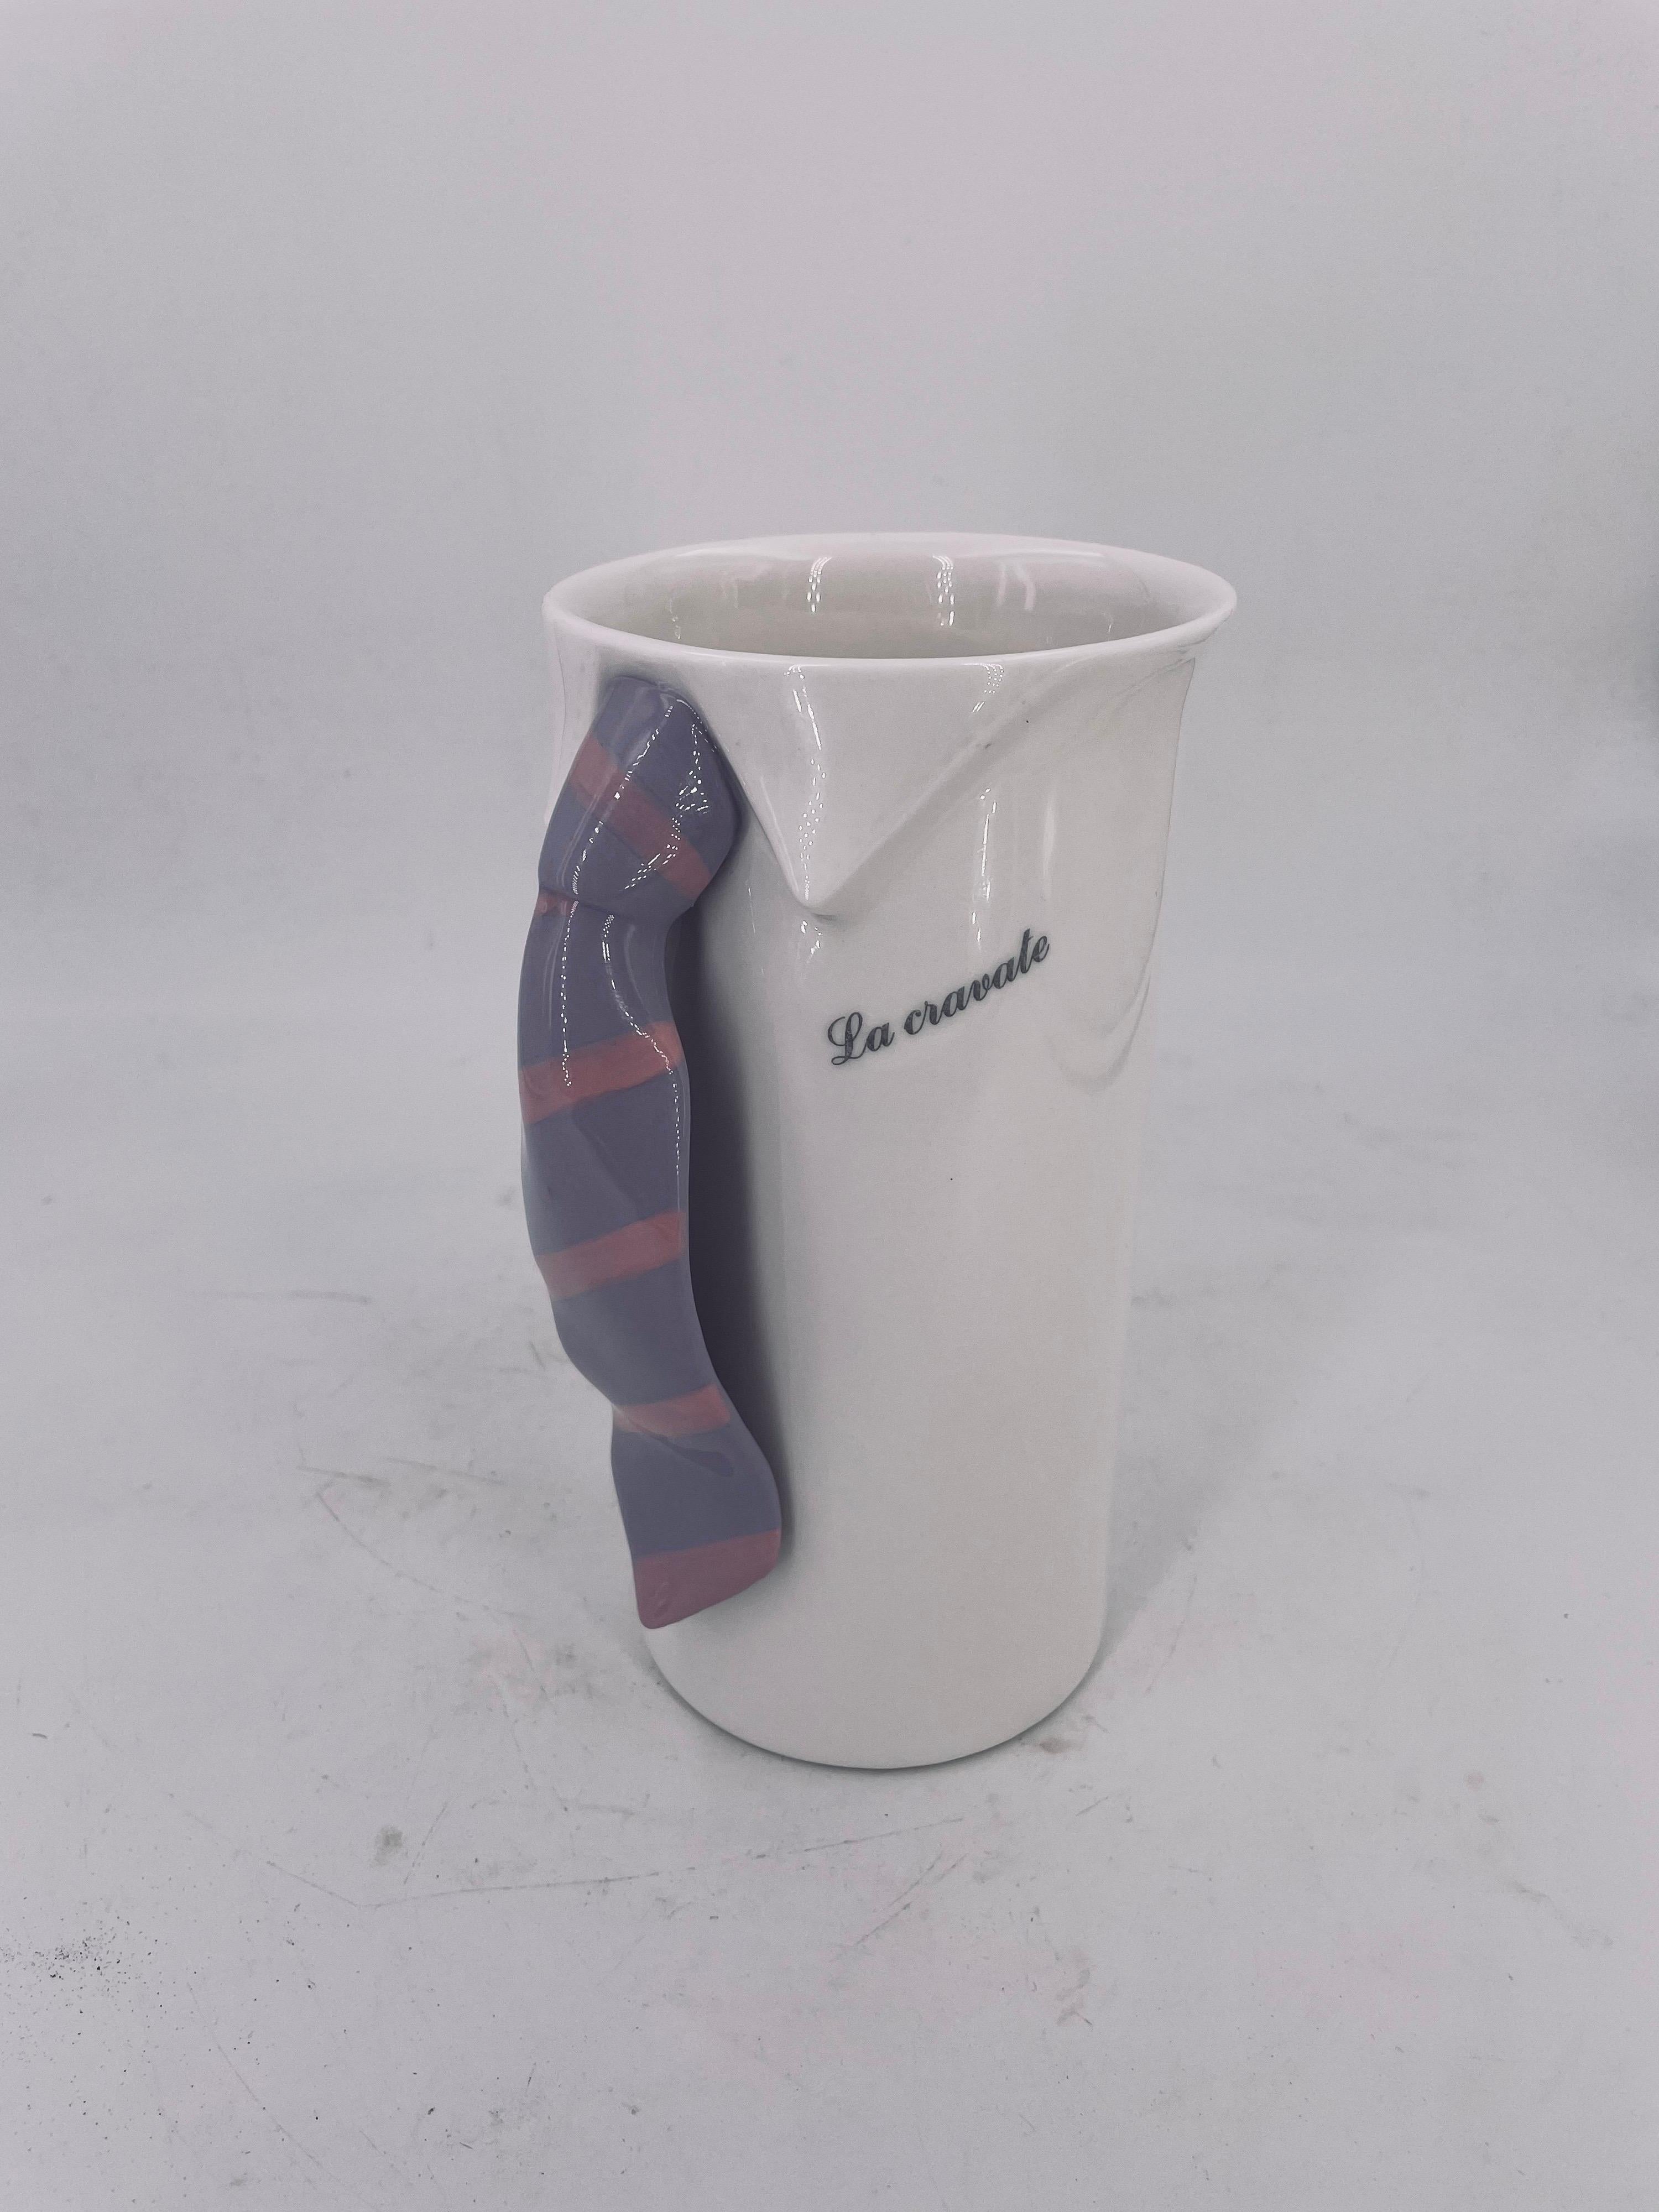 Really cool and unique white porcelain pitcher circa 1980's, Made in Japan great Memphis era piece excellent condition with a tie handle, and a legend in Italian Le Cravate, The tie.